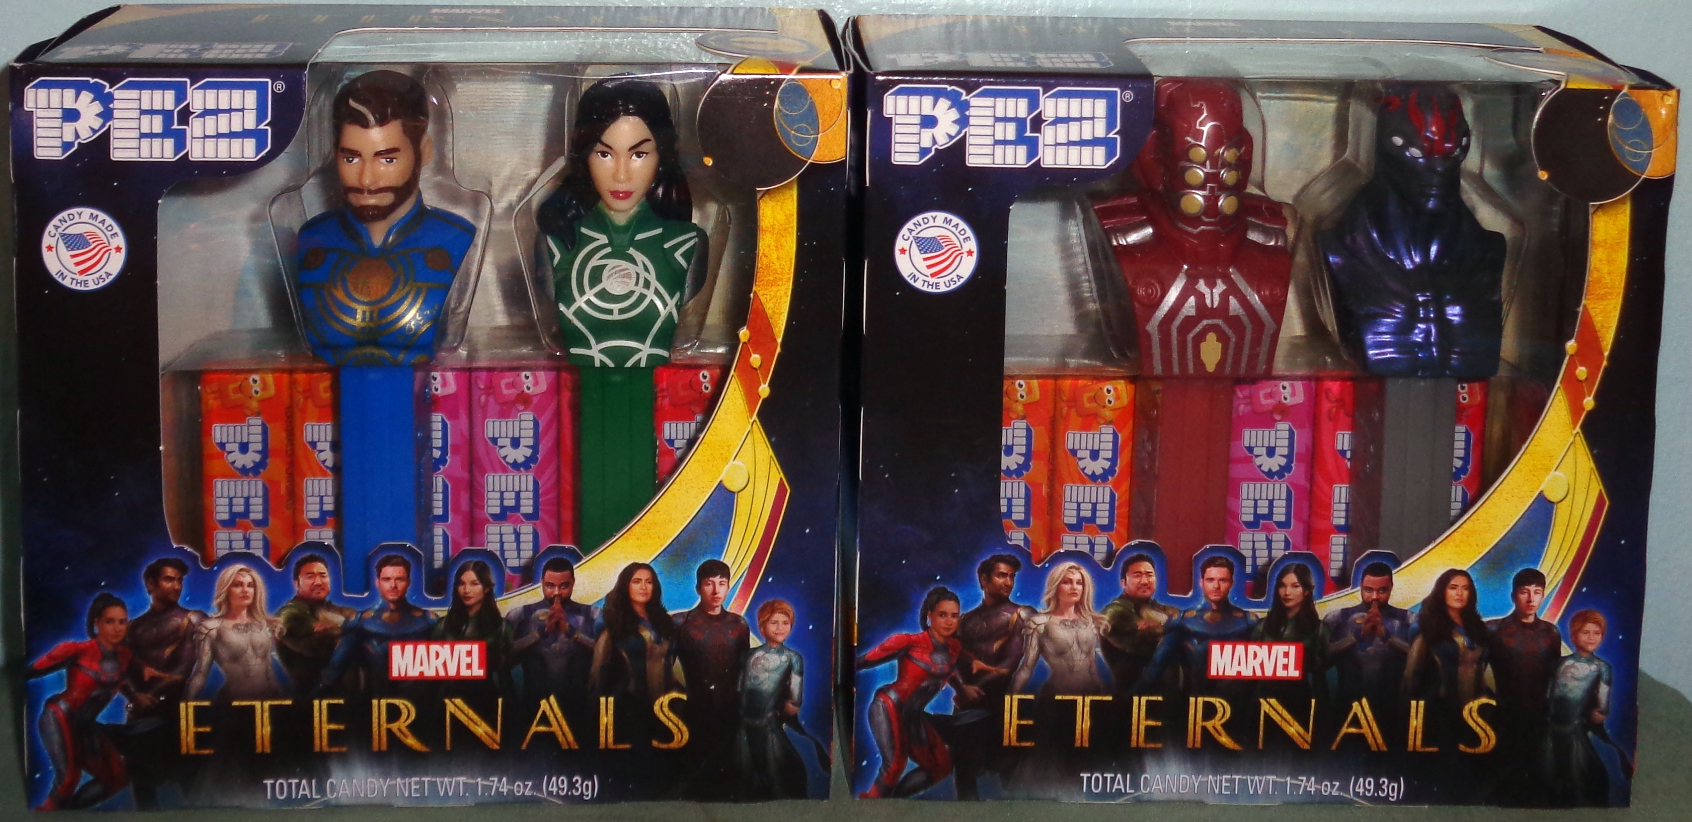 Pez Black Panther Twin Pack